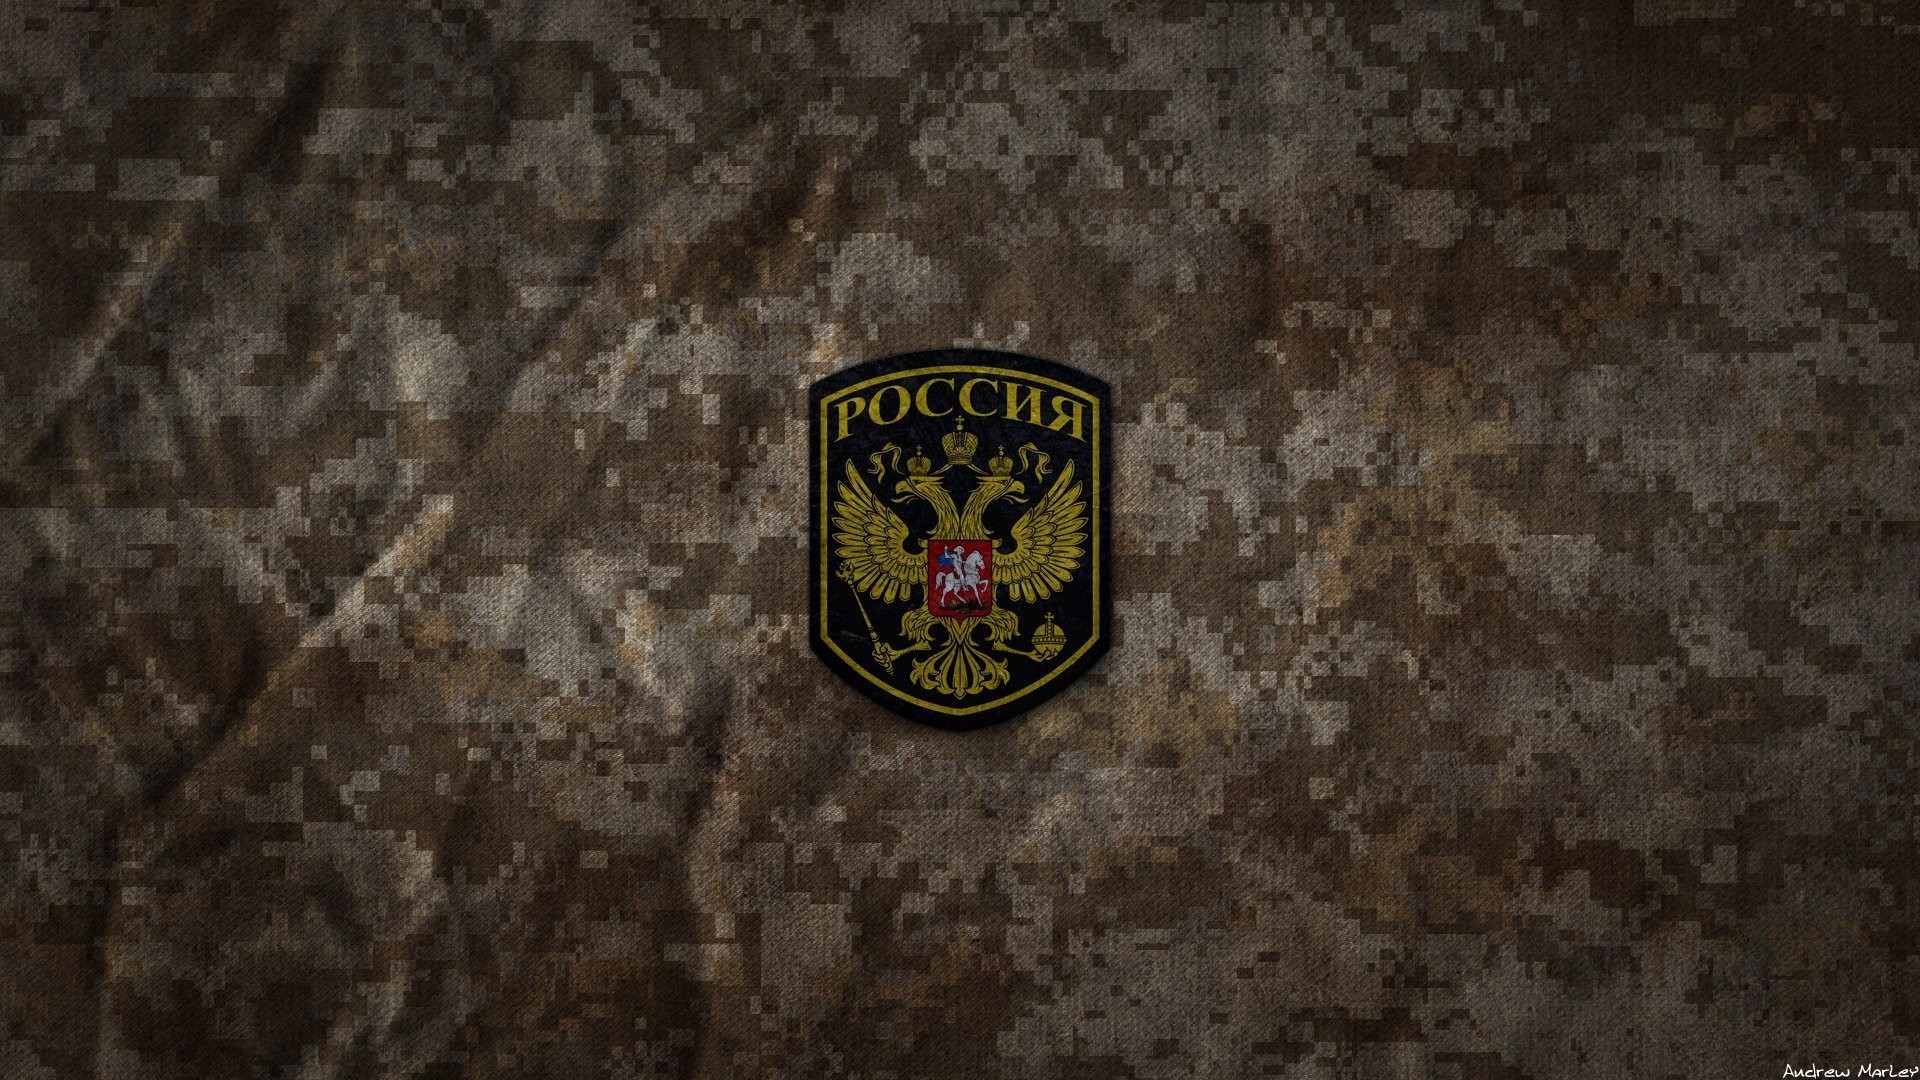 1920x1080 the army russia camouflage rrf collective security treaty organization  desert camouflage digital camo by andrew marley